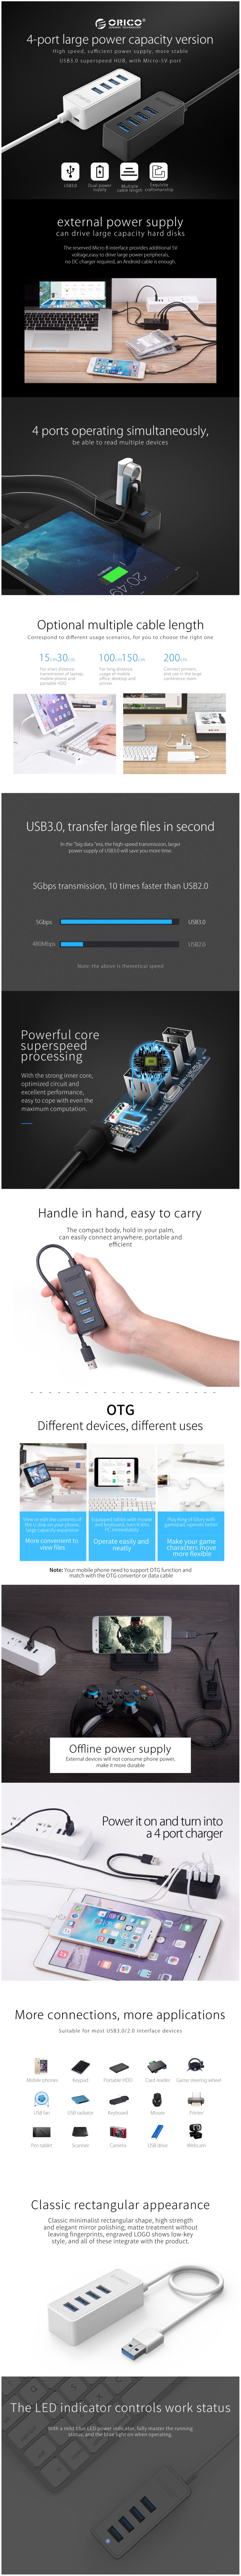 A large marketing image providing additional information about the product ORICO USB3.0 Desktop HUB with 5V Micro B Charger Port - Additional alt info not provided